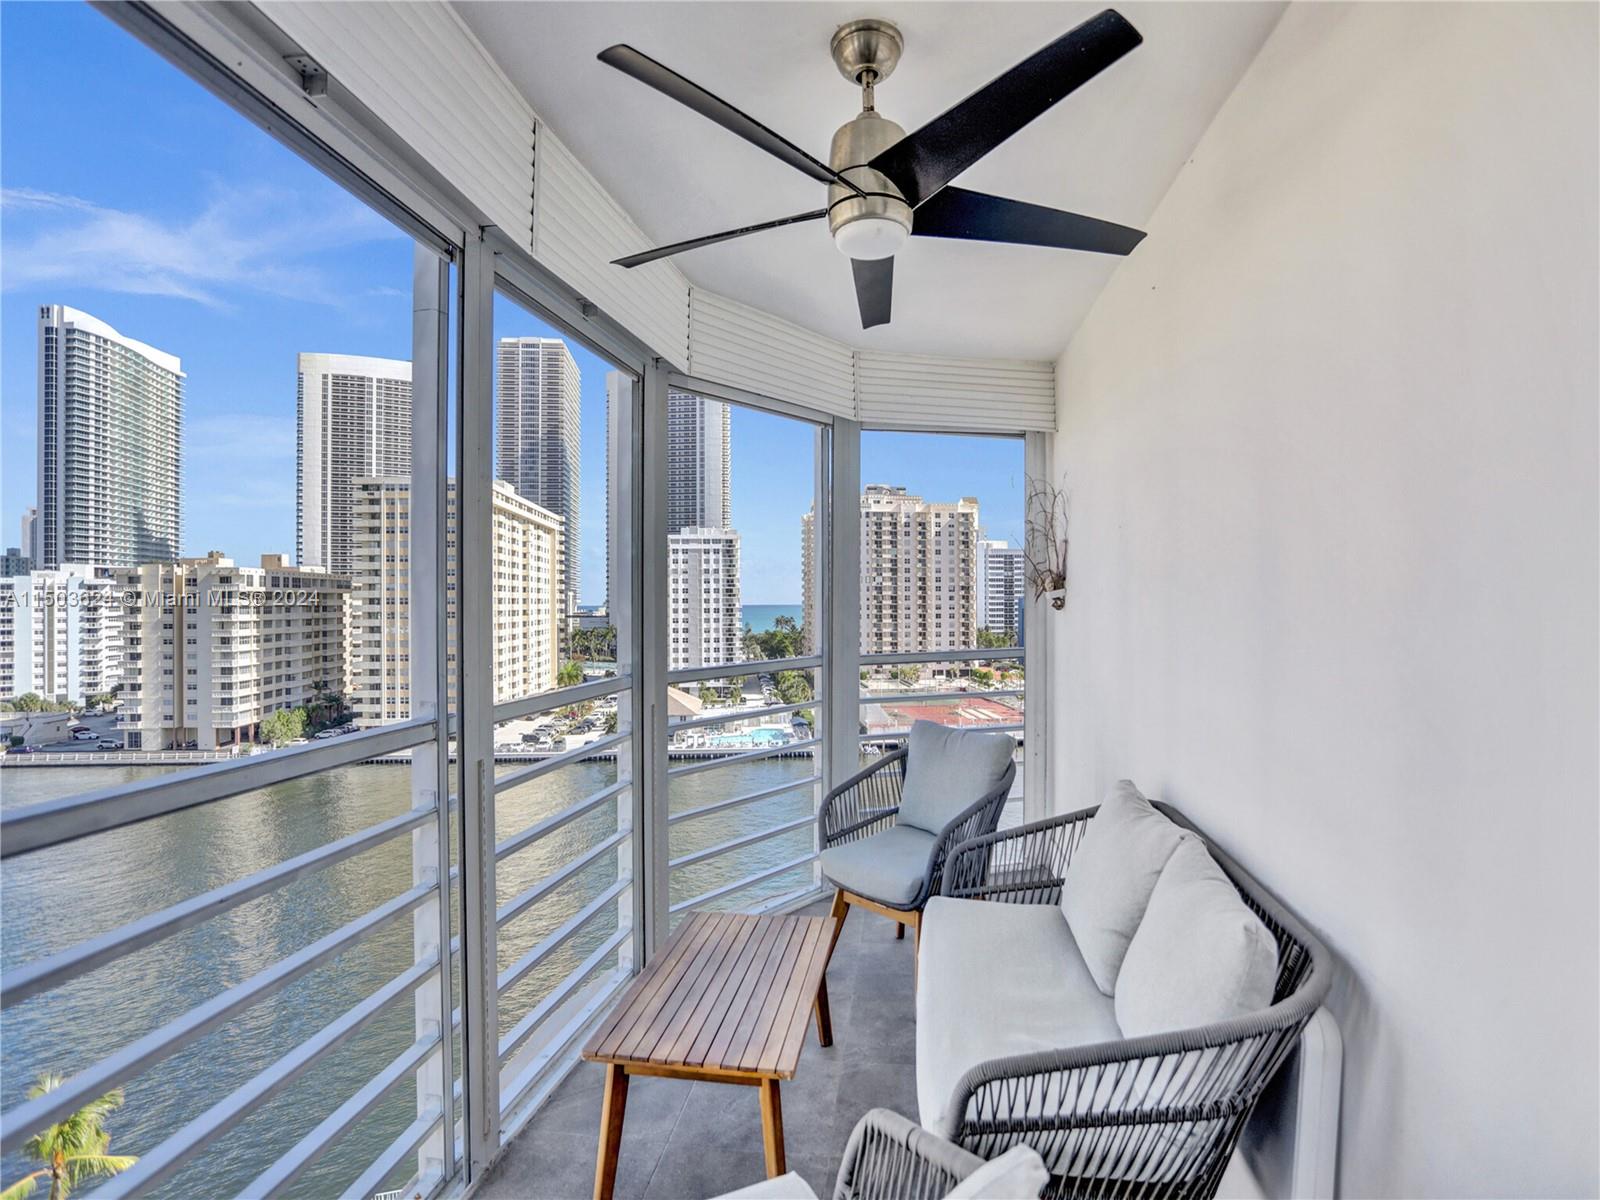 100 Golden Isles Dr #1007  (Available May 1), Hallandale Beach FL 33009